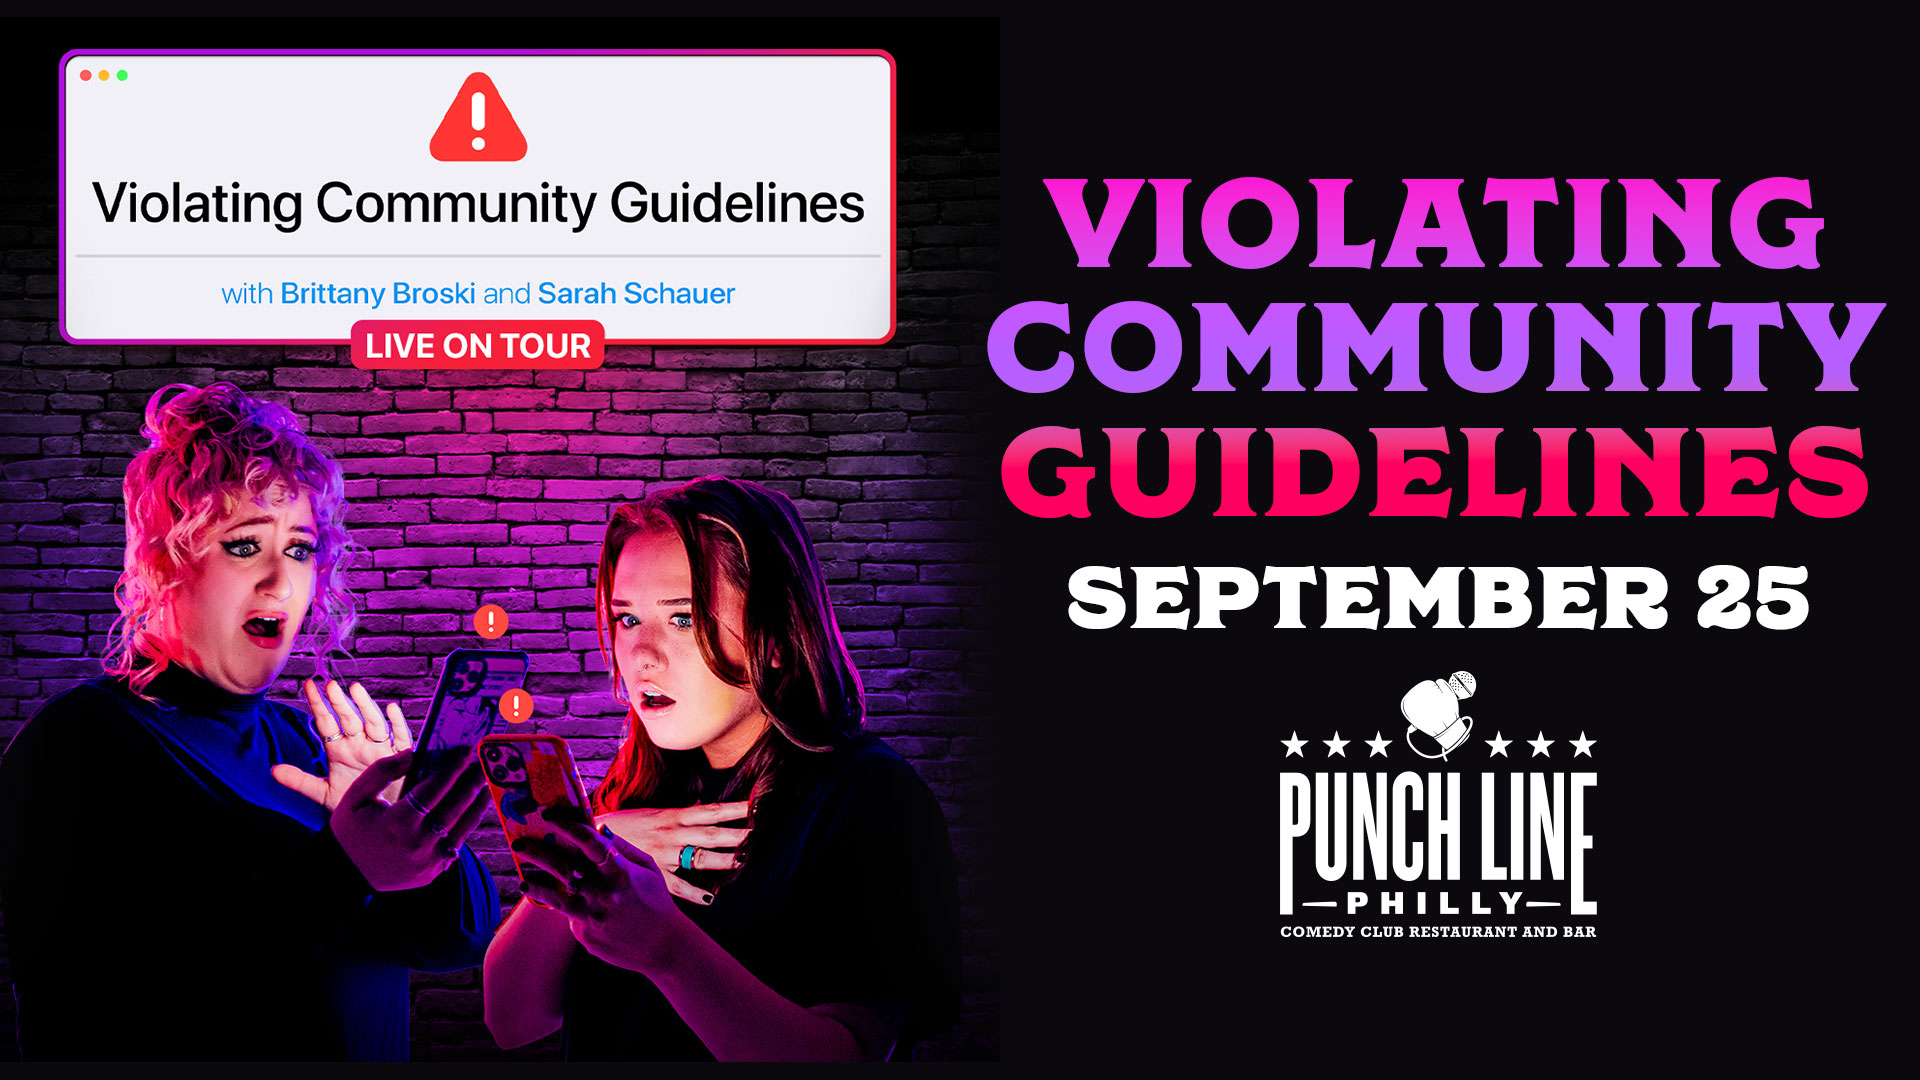 VIOLATING COMMUNITY GUIDELINES with Brittany Broski and Sarah Schauer